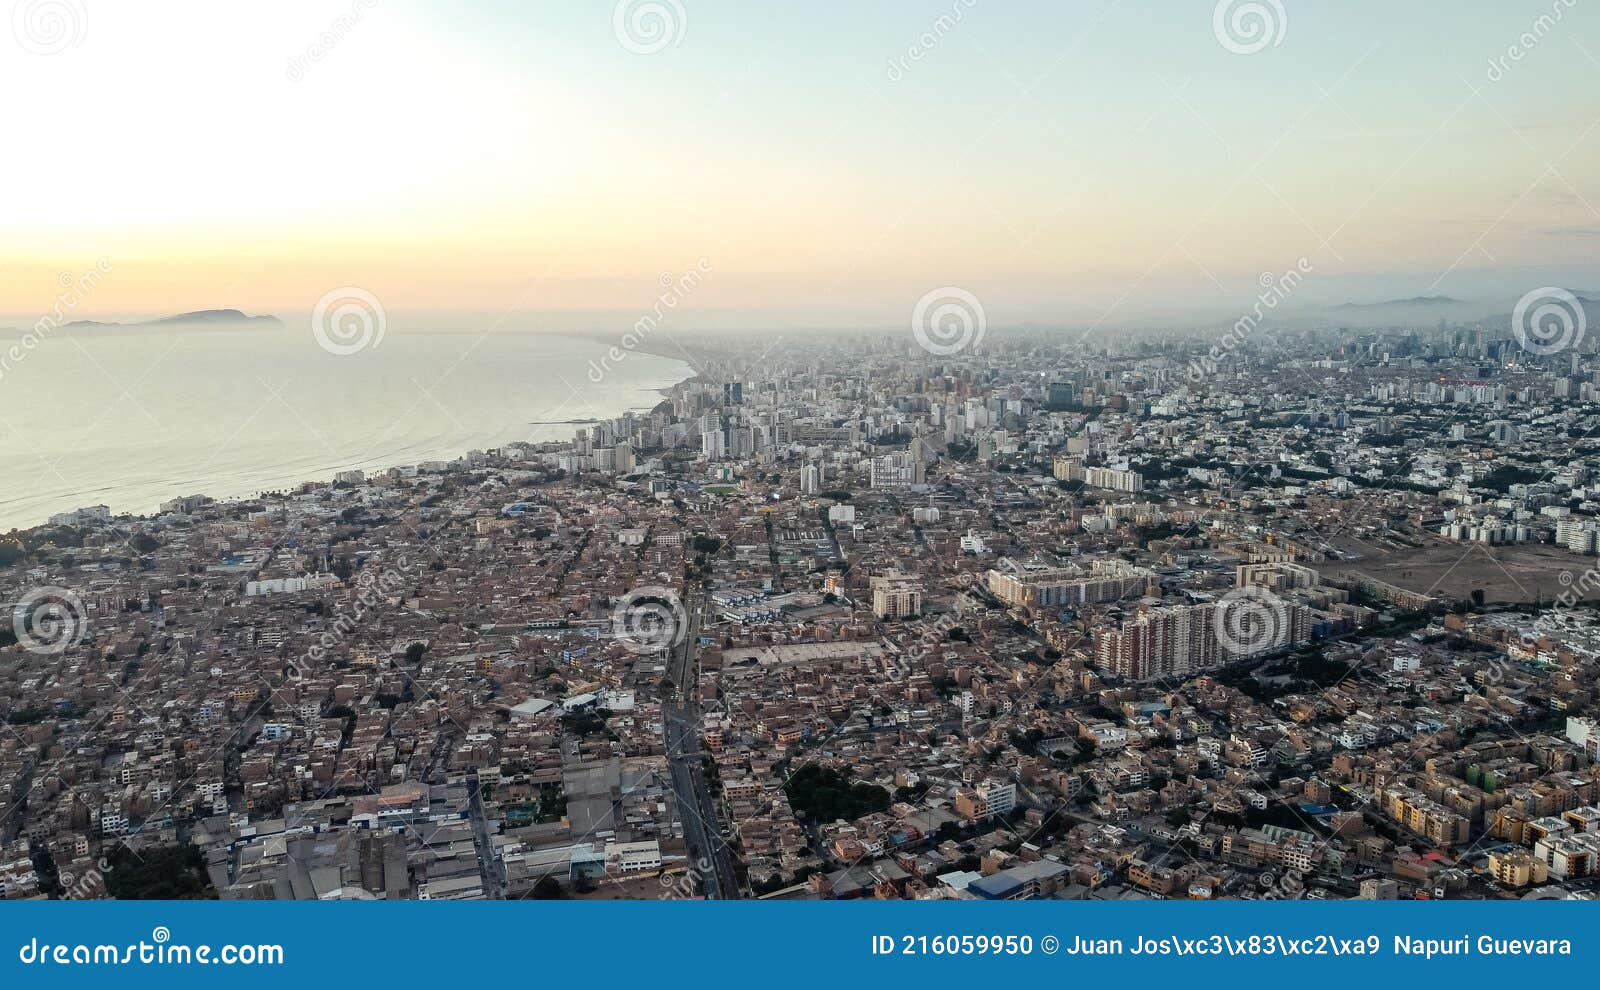 aerial view of the city of lima with the districts of miraflores, barranco and surco.